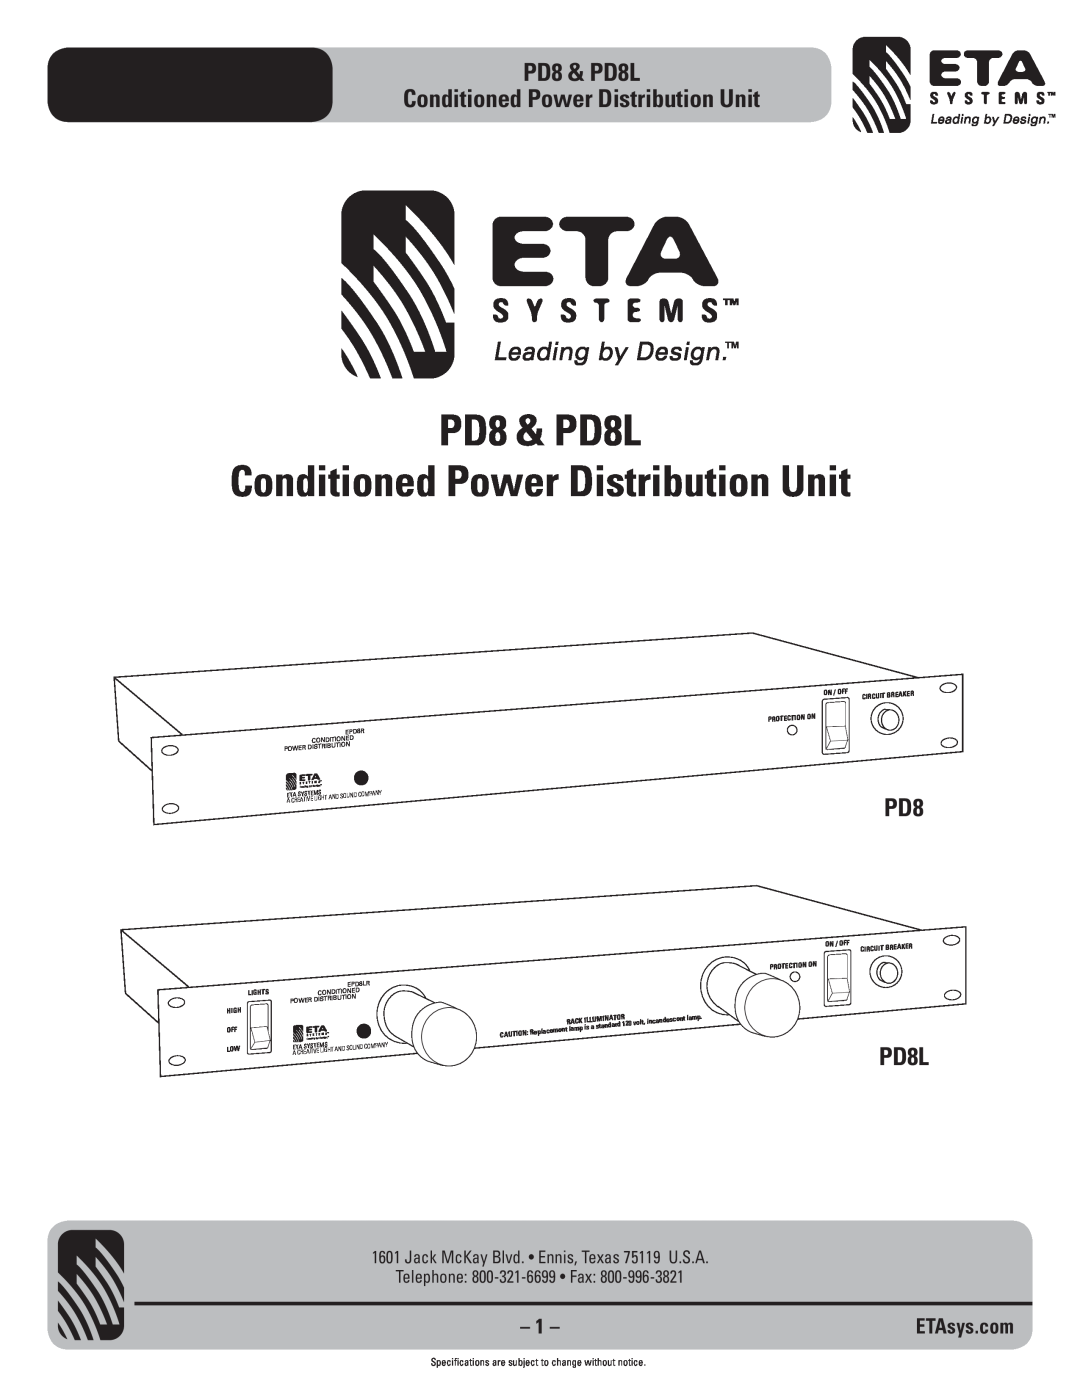 ETA Systems specifications PD8 & PD8L Conditioned Power Distribution Unit, EPD8R, Telephone 800-321-6699 Fax, EPD8LR 